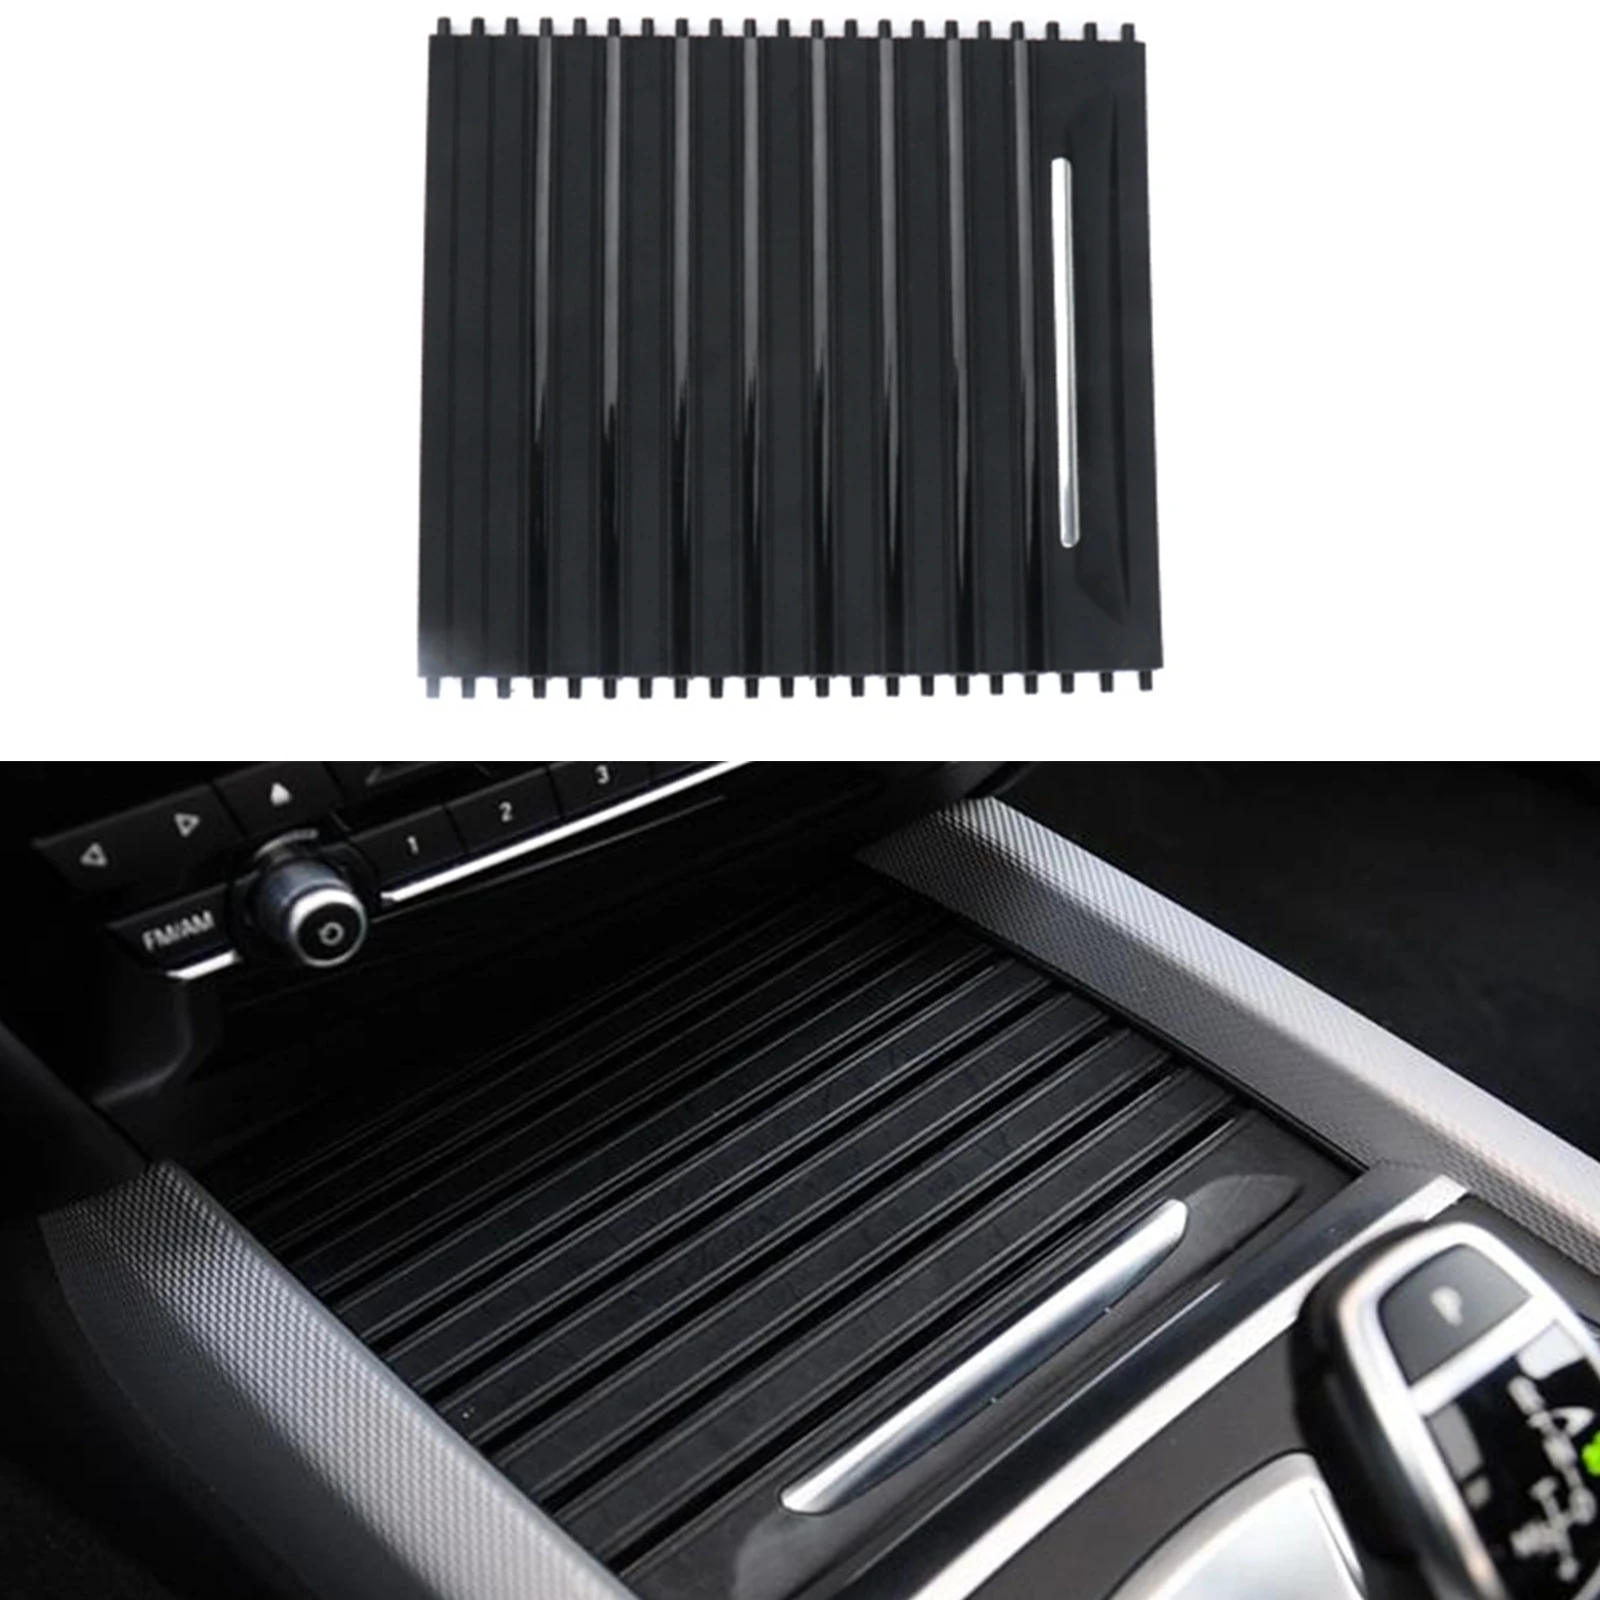 

For BMW F15 F85 X5 X5M 2014-2018 F16 F86 X6 X6M 2015-2019 Front Center Console Water Cup Holder Roller Blind Drinks Panel Cover